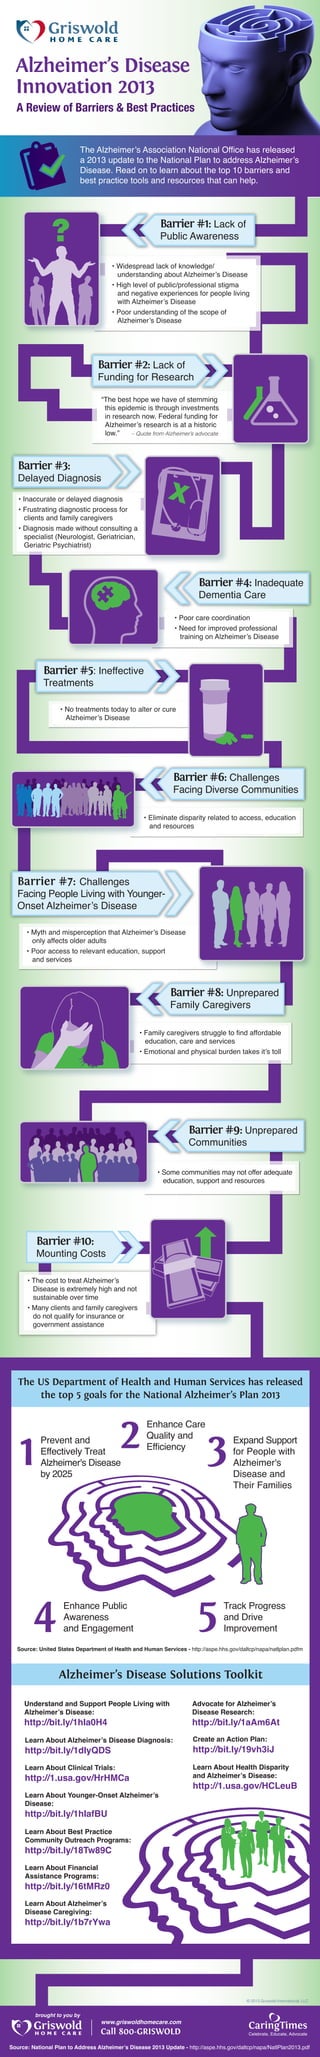 Alzheimer’s Disease
Innovation 2013
A Review of Barriers & Best Practices
The Alzheimer’s Association National Office has released
a 2013 update to the National Plan to address Alzheimer’s
Disease. Read on to learn about the top 10 barriers and
best practice tools and resources that can help.

Barrier #1: Lack of

Public Awareness

• Widespread lack of knowledge/
understanding about Alzheimer’s Disease
• High level of public/professional stigma
and negative experiences for people living
with Alzheimer’s Disease
• Poor understanding of the scope of
Alzheimer’s Disease

Barrier #2: Lack of

Funding for Research
“The best hope we have of stemming
this epidemic is through investments
in research now. Federal funding for
Alzheimer’s research is at a historic
low.”
– Quote from Alzheimer’s advocate

Barrier #3:

Delayed Diagnosis
• Inaccurate or delayed diagnosis
• Frustrating diagnostic process for
clients and family caregivers
• Diagnosis made without consulting a
specialist (Neurologist, Geriatrician,
Geriatric Psychiatrist)

Barrier #4: Inadequate
Dementia Care

• Poor care coordination
• Need for improved professional
training on Alzheimer’s Disease

Barrier #5: Ineffective

Treatments

• No treatments today to alter or cure
Alzheimer’s Disease

Barrier #6: Challenges

Facing Diverse Communities

• Eliminate disparity related to access, education
and resources

Barrier #7: Challenges

Facing People Living with YoungerOnset Alzheimer’s Disease
• Myth and misperception that Alzheimer’s Disease
only affects older adults
• Poor access to relevant education, support
and services

Barrier #8: Unprepared

Family Caregivers

• Family caregivers struggle to find affordable
education, care and services
• Emotional and physical burden takes it’s toll

Barrier #9: Unprepared
Communities

• Some communities may not offer adequate
education, support and resources

Barrier #10:

Mounting Costs
• The cost to treat Alzheimer’s
Disease is extremely high and not
sustainable over time
• Many clients and family caregivers
do not qualify for insurance or
government assistance

The US Department of Health and Human Services has released
the top 5 goals for the National Alzheimer’s Plan 2013

Prevent and
Effectively Treat
Alzheimer's Disease
by 2025

Enhance Care
Quality and
Efficiency

Enhance Public
Awareness
and Engagement

Expand Support
for People with
Alzheimer's
Disease and
Their Families

Track Progress
and Drive
Improvement

Source: United States Department of Health and Human Services - http://aspe.hhs.gov/daltcp/napa/natlplan.pdfm

Alzheimer’s Disease Solutions Toolkit
Understand and Support People Living with
Alzheimer’s Disease:

Advocate for Alzheimer’s
Disease Research:

Learn About Alzheimer’s Disease Diagnosis:

Create an Action Plan:

Learn About Clinical Trials:

Learn About Health Disparity
and Alzheimer’s Disease:

http://bit.ly/1hIa0H4

http://bit.ly/1dIyQDS

http://1.usa.gov/HrHMCa
Learn About Younger-Onset Alzheimer’s
Disease:

http://bit.ly/1aAm6At
http://bit.ly/19vh3iJ
http://1.usa.gov/HCLeuB

http://bit.ly/1hIafBU

Learn About Best Practice
Community Outreach Programs:

http://bit.ly/18Tw89C
Learn About Financial
Assistance Programs:

http://bit.ly/16tMRz0
Learn About Alzheimer’s
Disease Caregiving:

http://bit.ly/1b7rYwa

© 2013 Griswold International, LLC

brought to you by

www.griswoldhomecare.com

Call 800-GRISWOLD

CaringTimes

Celebrate, Educate, Advocate

Source: National Plan to Address Alzheimer’s Disease 2013 Update - http://aspe.hhs.gov/daltcp/napa/NatlPlan2013.pdf

 